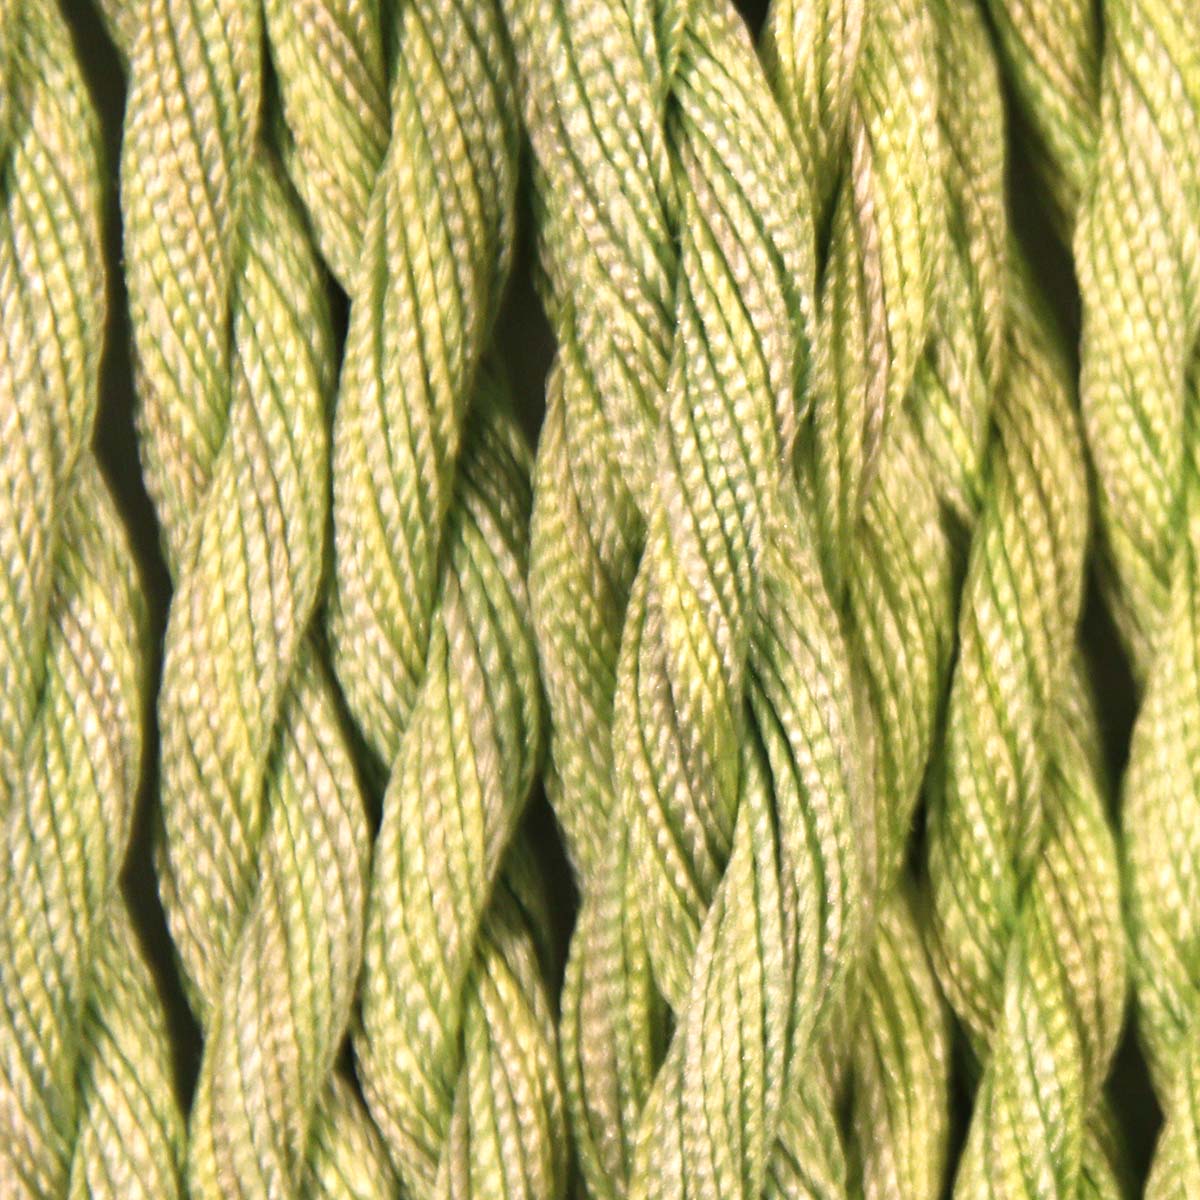 www.colourstreams.com.au Colour Streams Hand Dyed Silk Threads Silken Strands Ophir Exotic Lights Aurora Slow Stitch Embroidery Textile Arts Fibre DL 58 New Leaf Greens